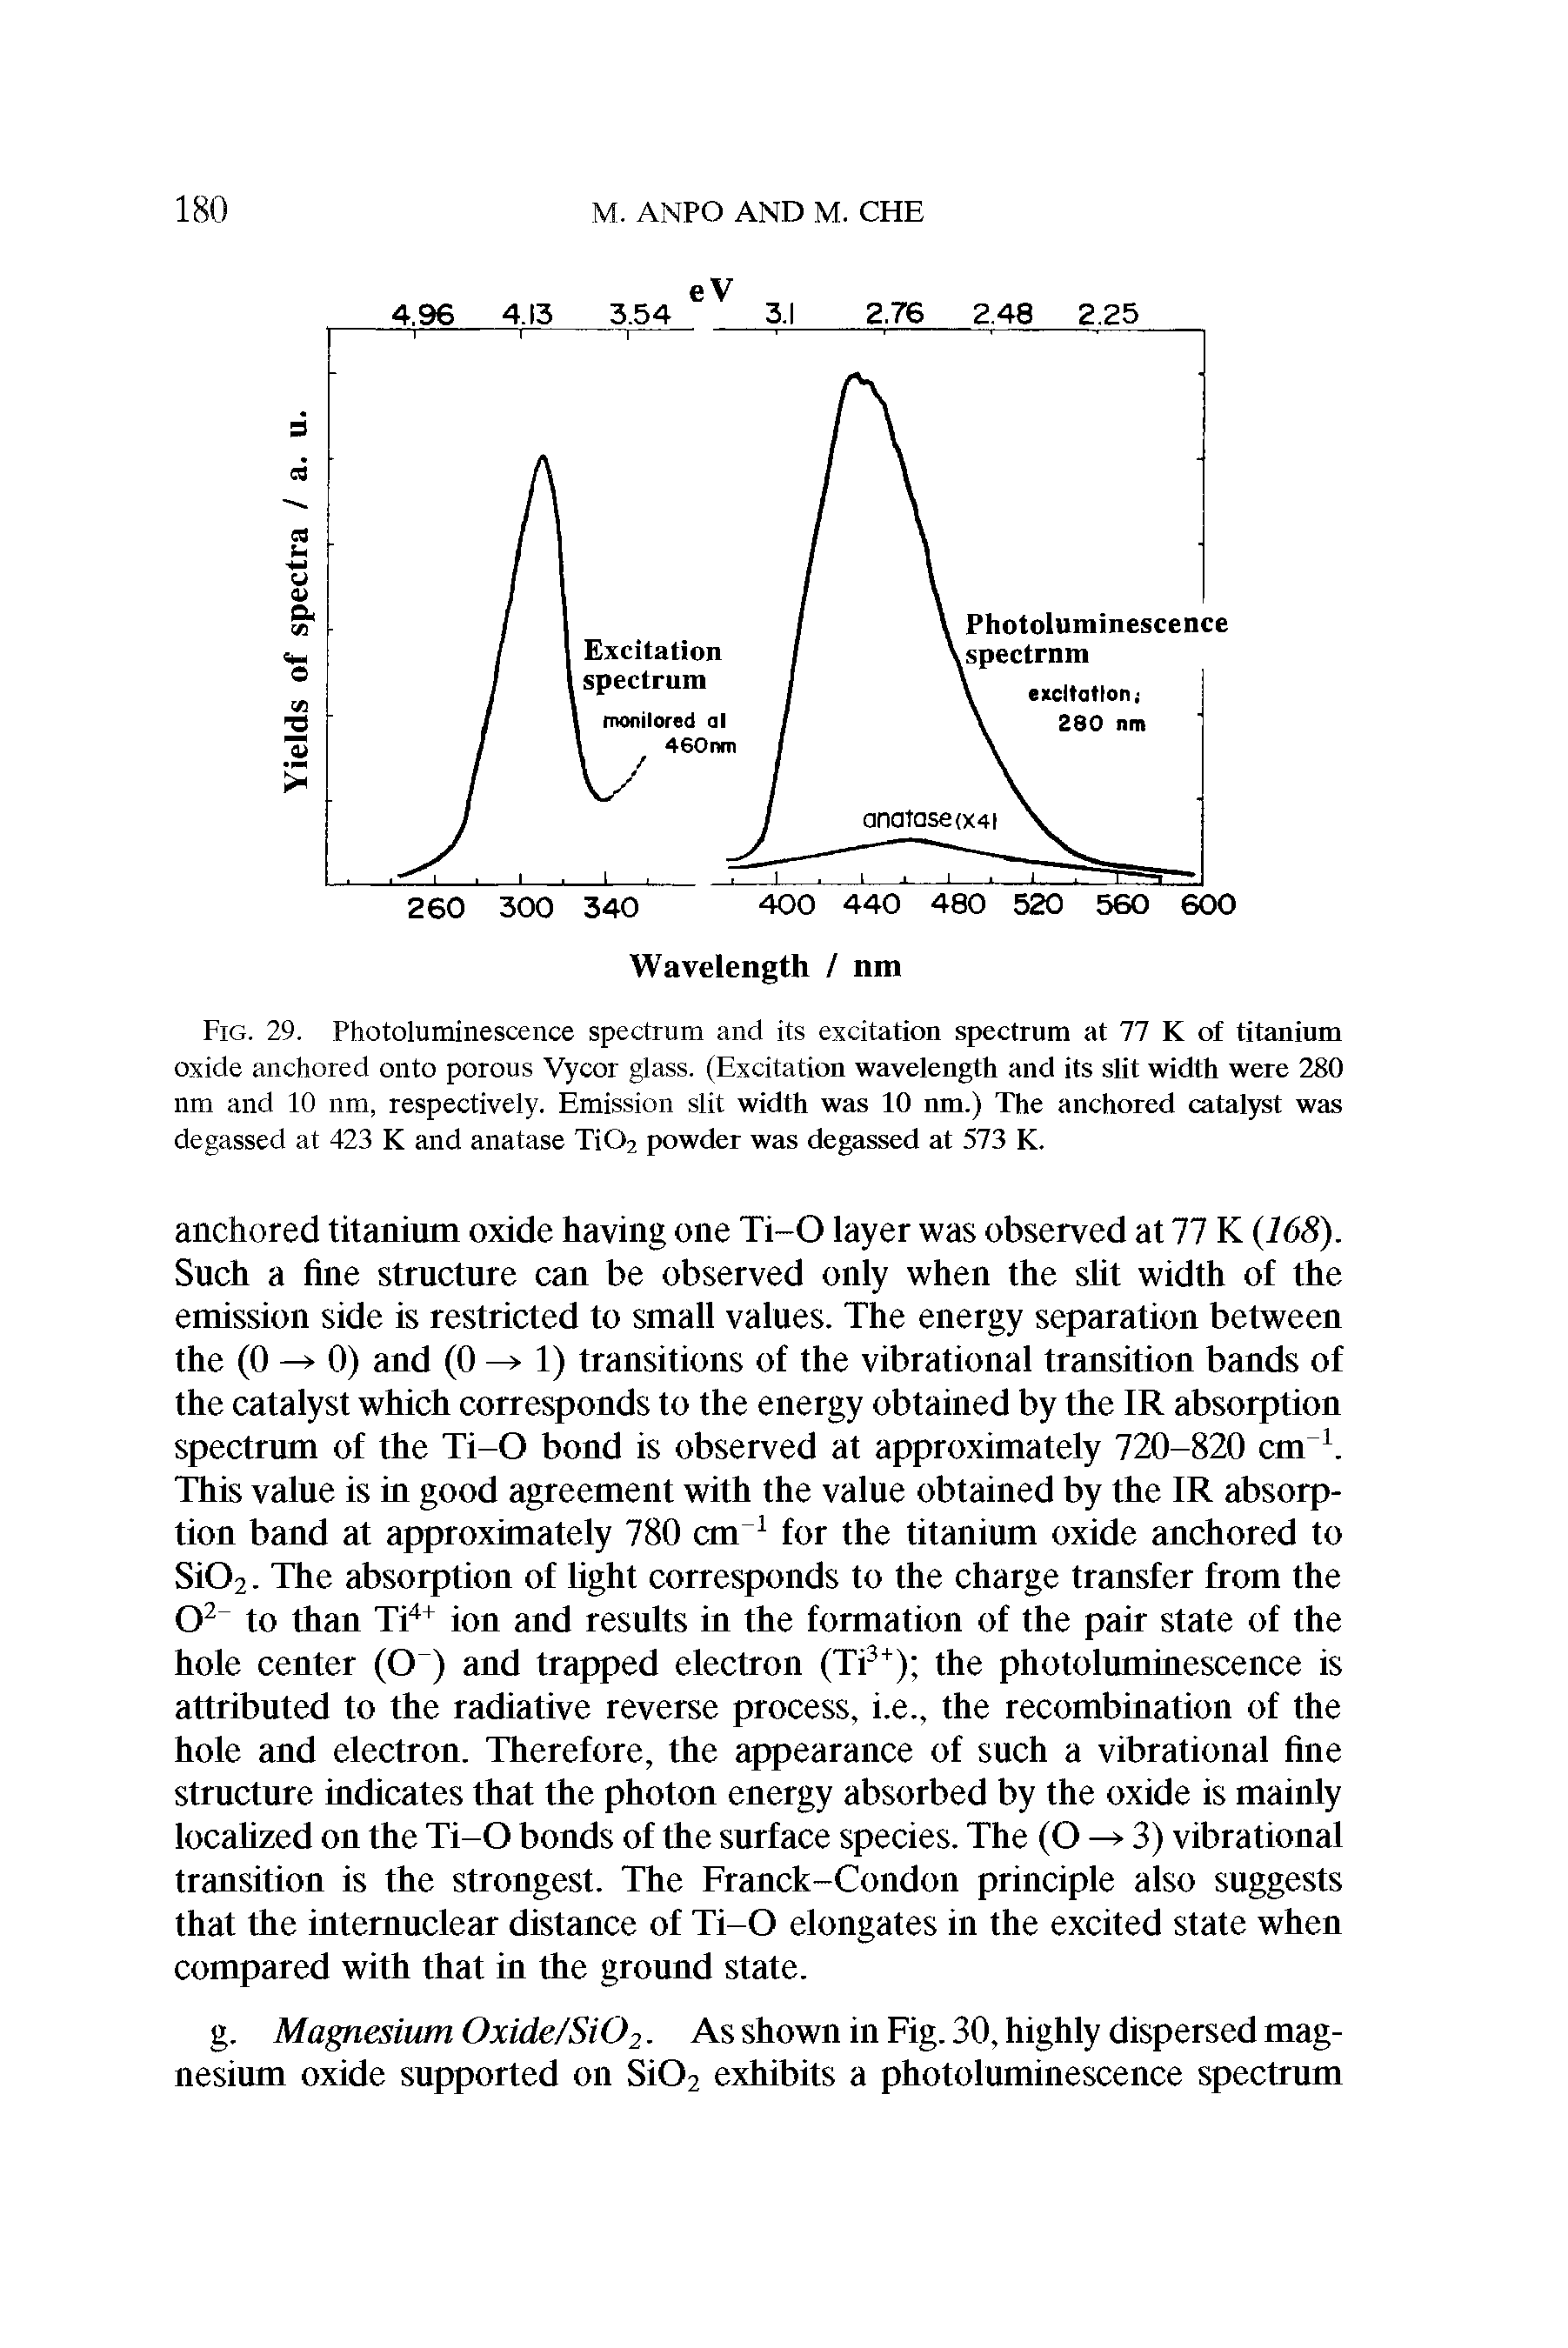 Fig. 29. Photoluminescence spectrum and its excitation spectrum at 77 K of titanium oxide anchored onto porous Vycor glass. (Excitation wavelength and its slit width were 280 nm and 10 nm, respectively. Emission slit width was 10 nm.) The anchored catalyst was degassed at 423 K and anatase Ti02 powder was degassed at 573 K.